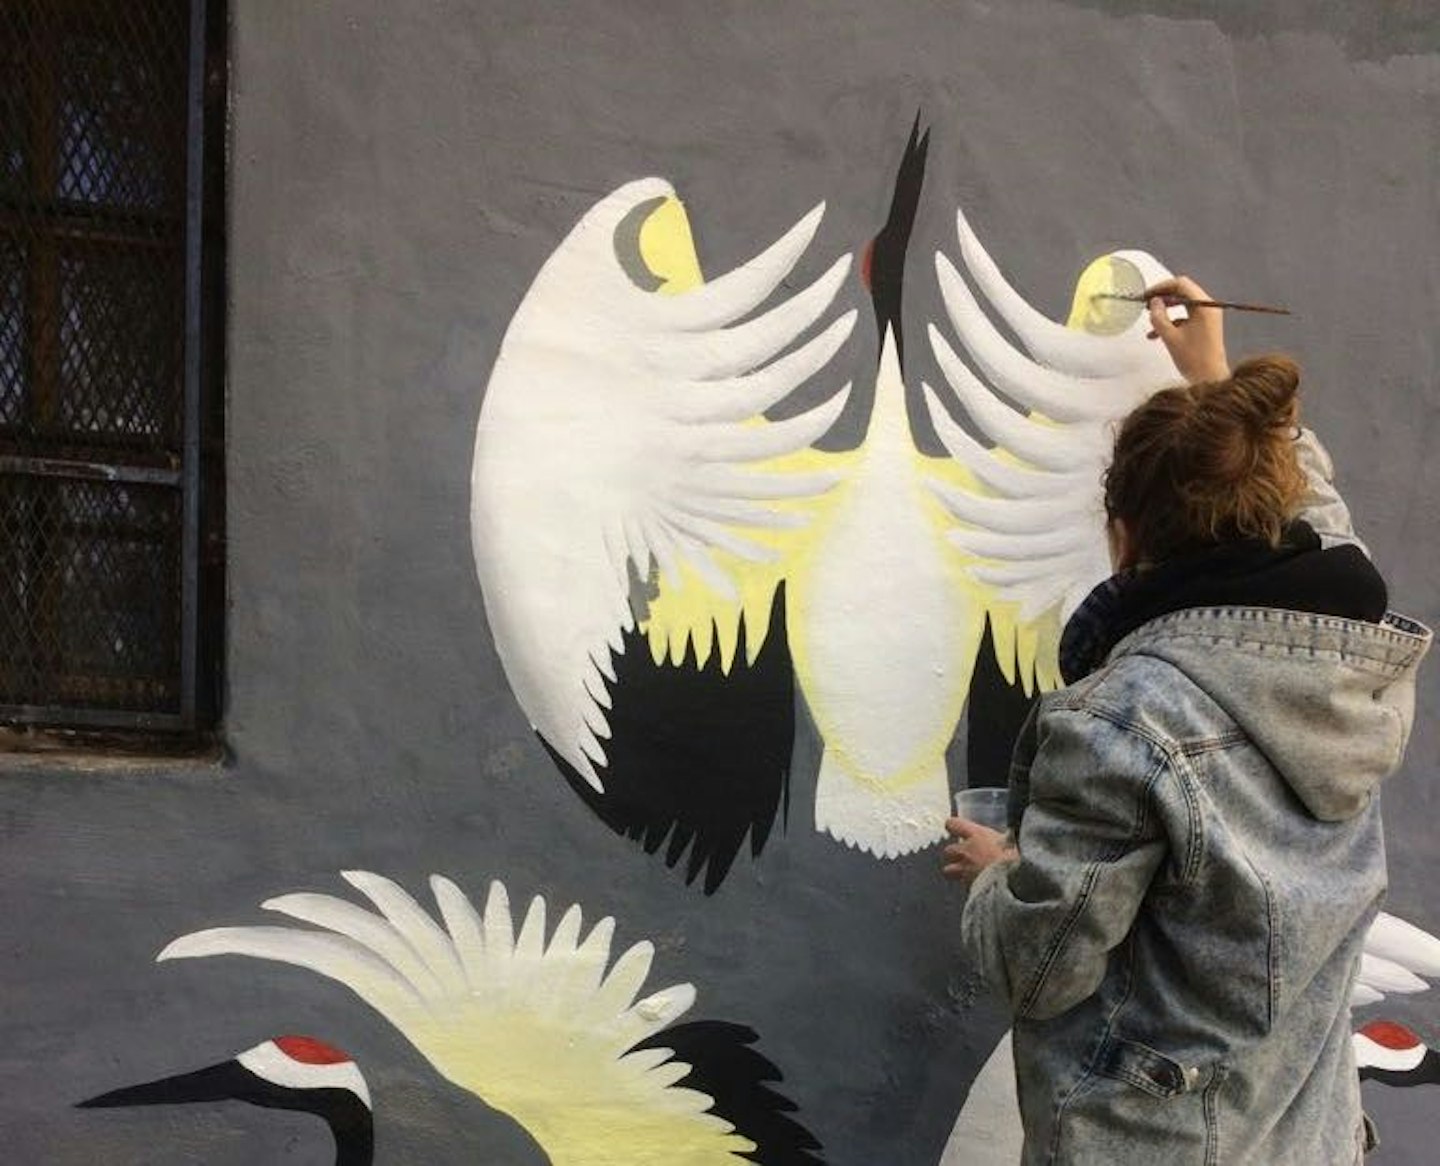 "Read Marleen's unique solo female travel experience in Argentina | She learned the entire mural process from start to finish and created her own piece of street art.  #vawaa #art #artist #solotravel #travel #argentina #buenosaires #wallmurals #murals #urbanart #streetart"